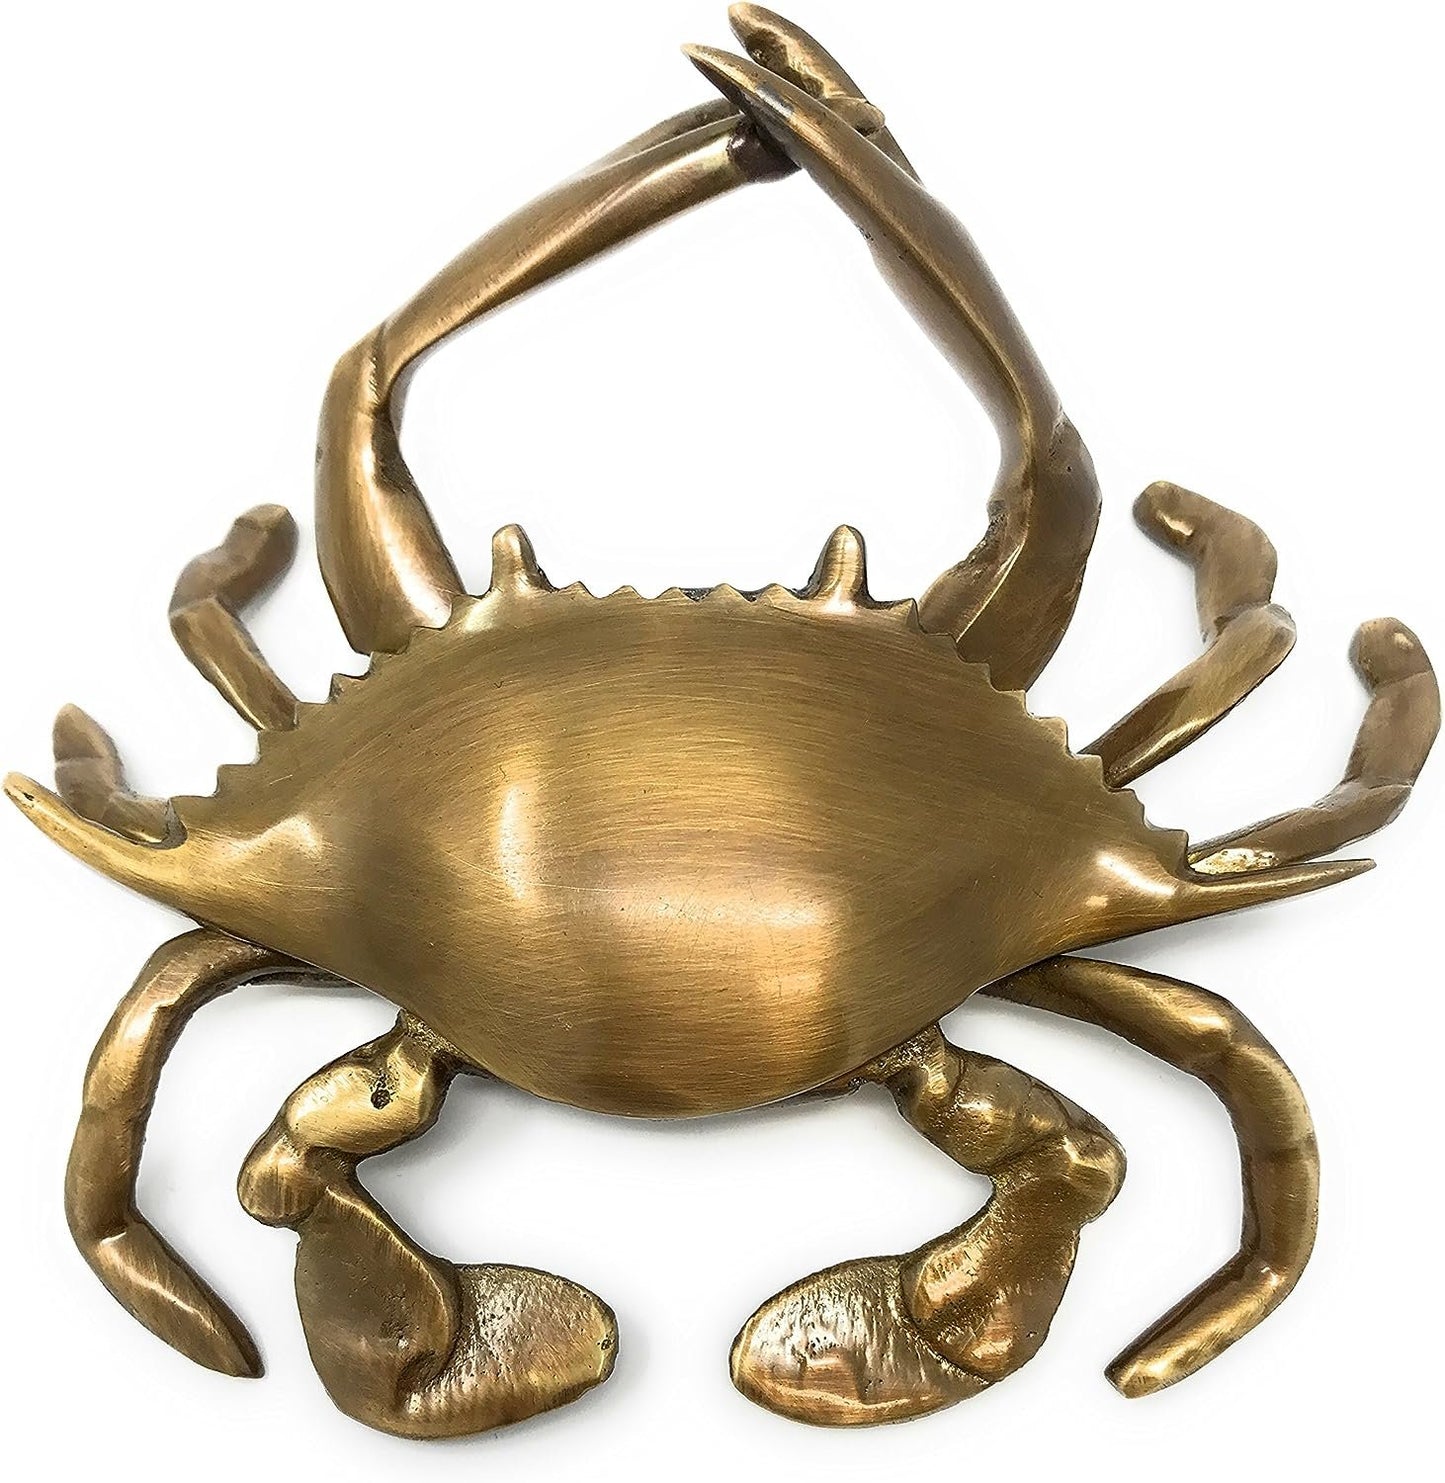 Madison Bay Company Nautical Antiqued Brass Blue Crab Paperweight, 5.5 Inches Wide